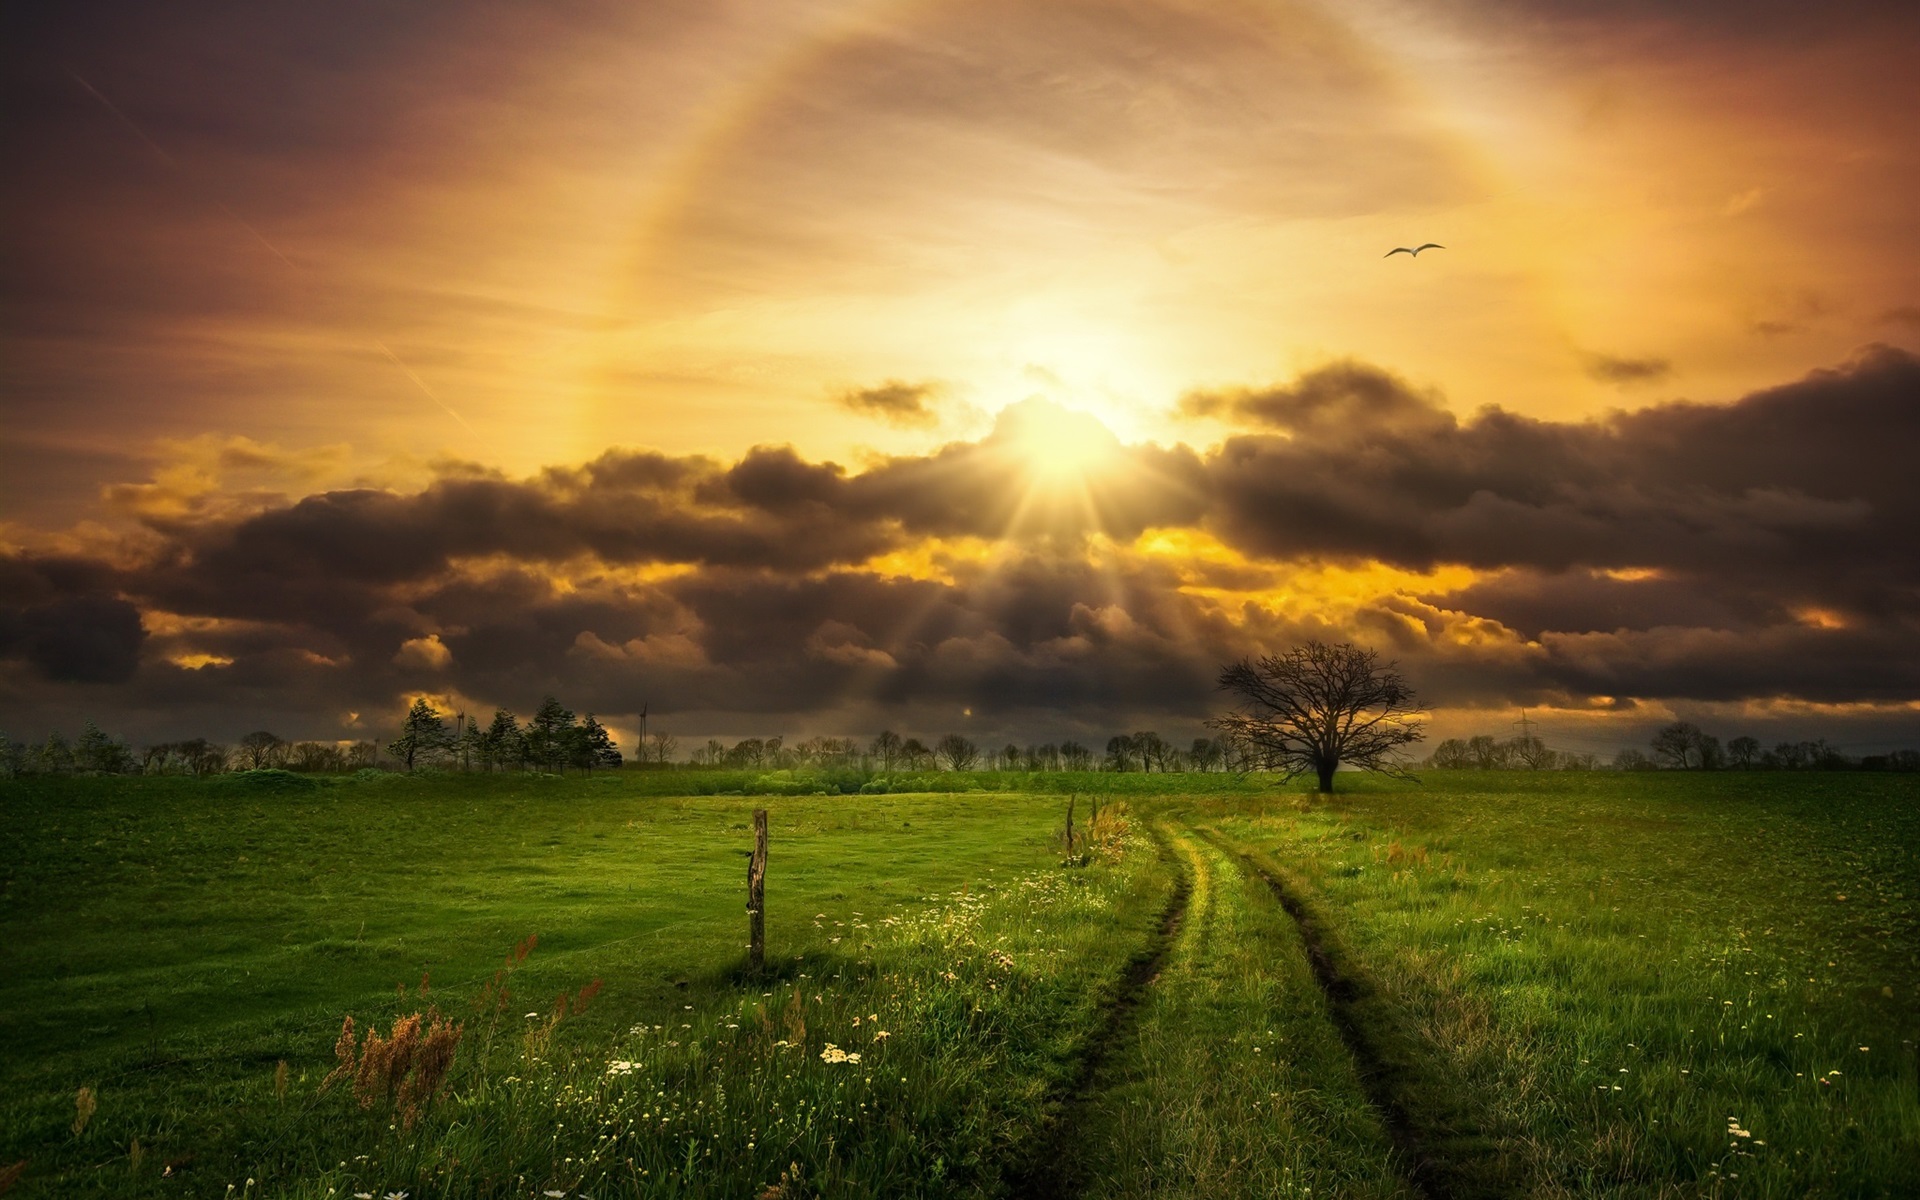 Beautiful Yellow Grass Field With Sunrays Landscape View Wallpapers